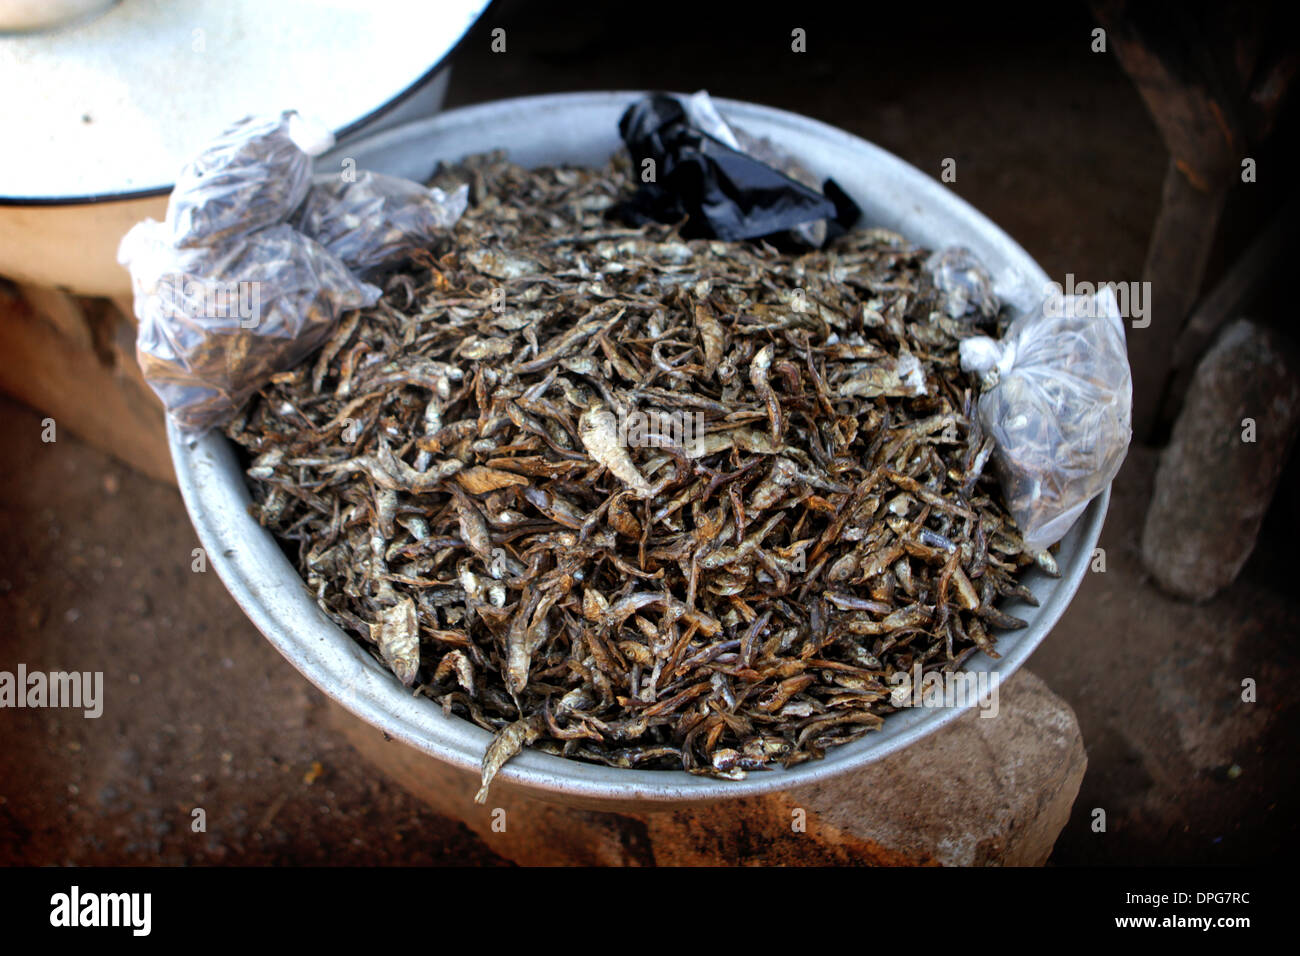 Basket of dried fish for sale in market place, Accra , Ghana Stock Photo